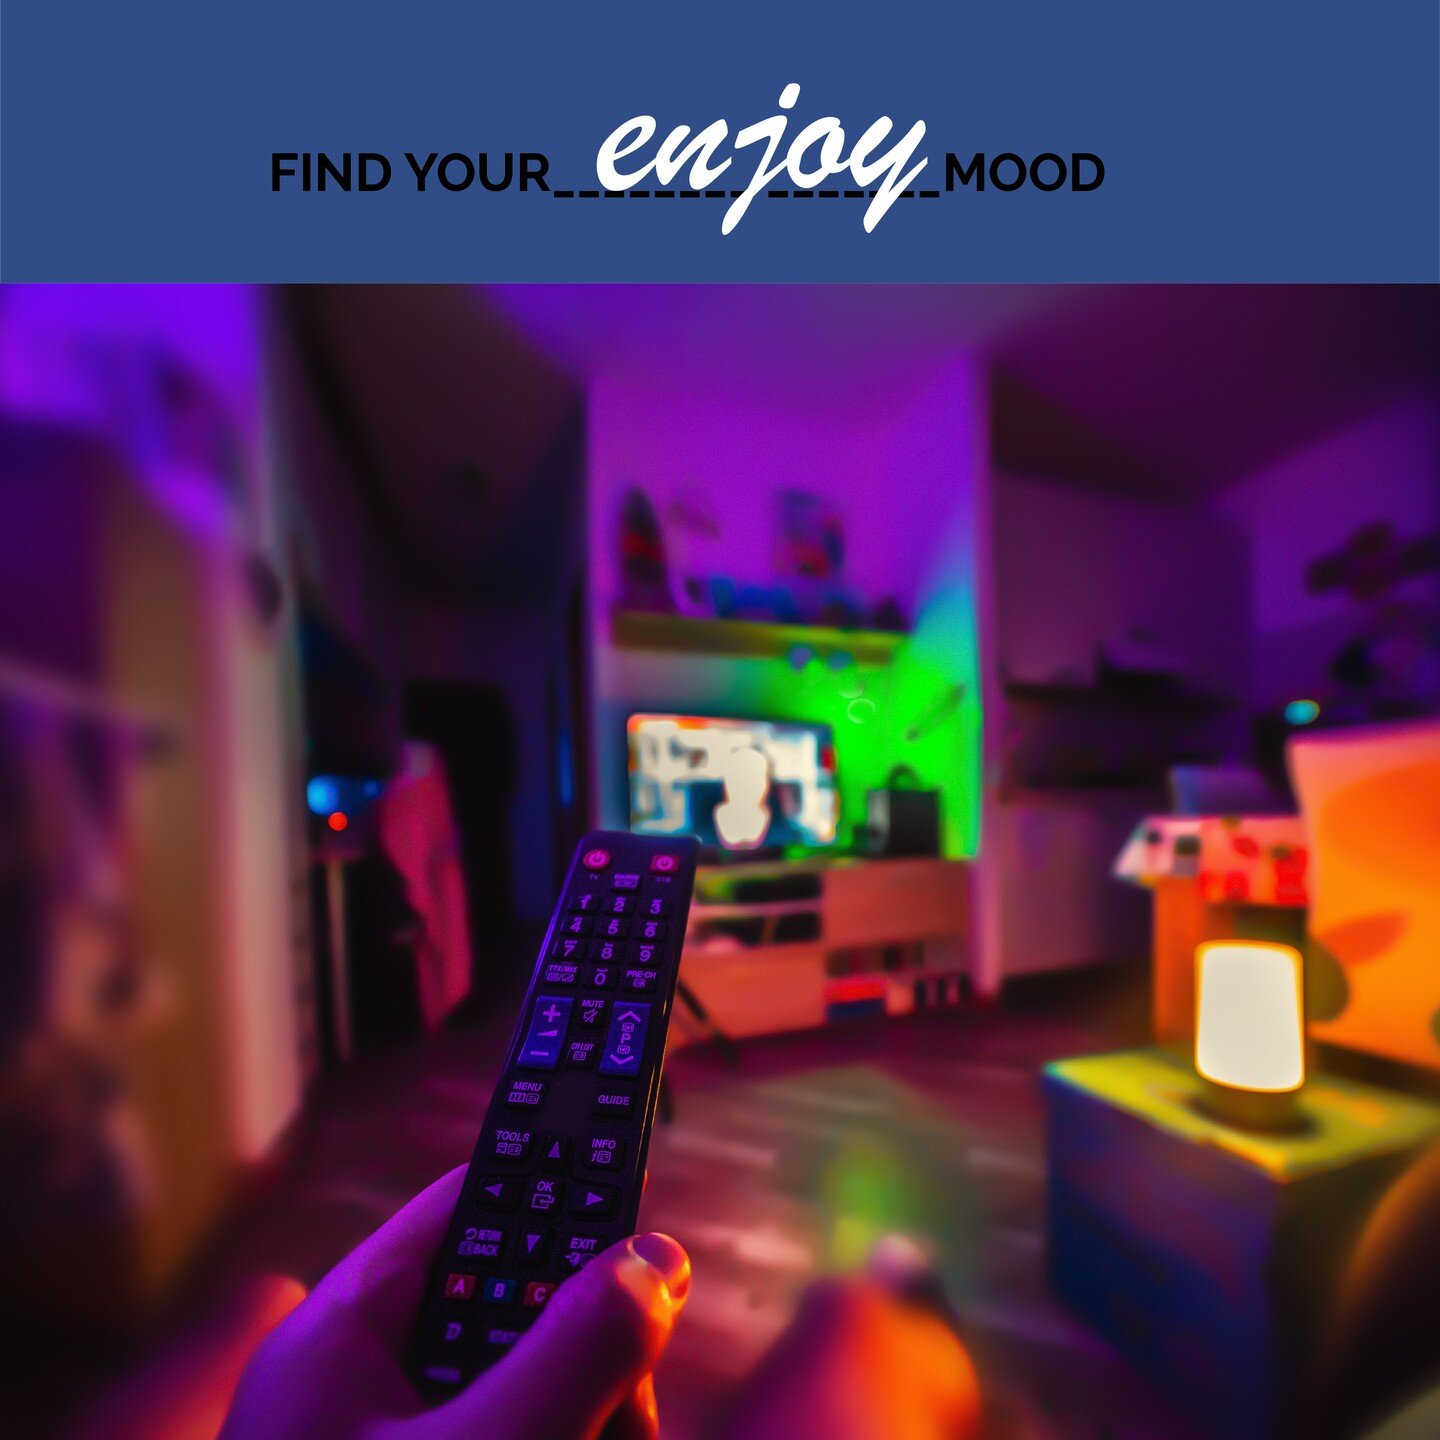 Are you looking for cannabis to indulge in before a movie? Are you looking for cannabis to inspire you? Are you looking for cannabis to make you feel relaxed, delightful, and content? 

Find your Enjoy cannabis mood with Leafwerx! The Enjoy collectio